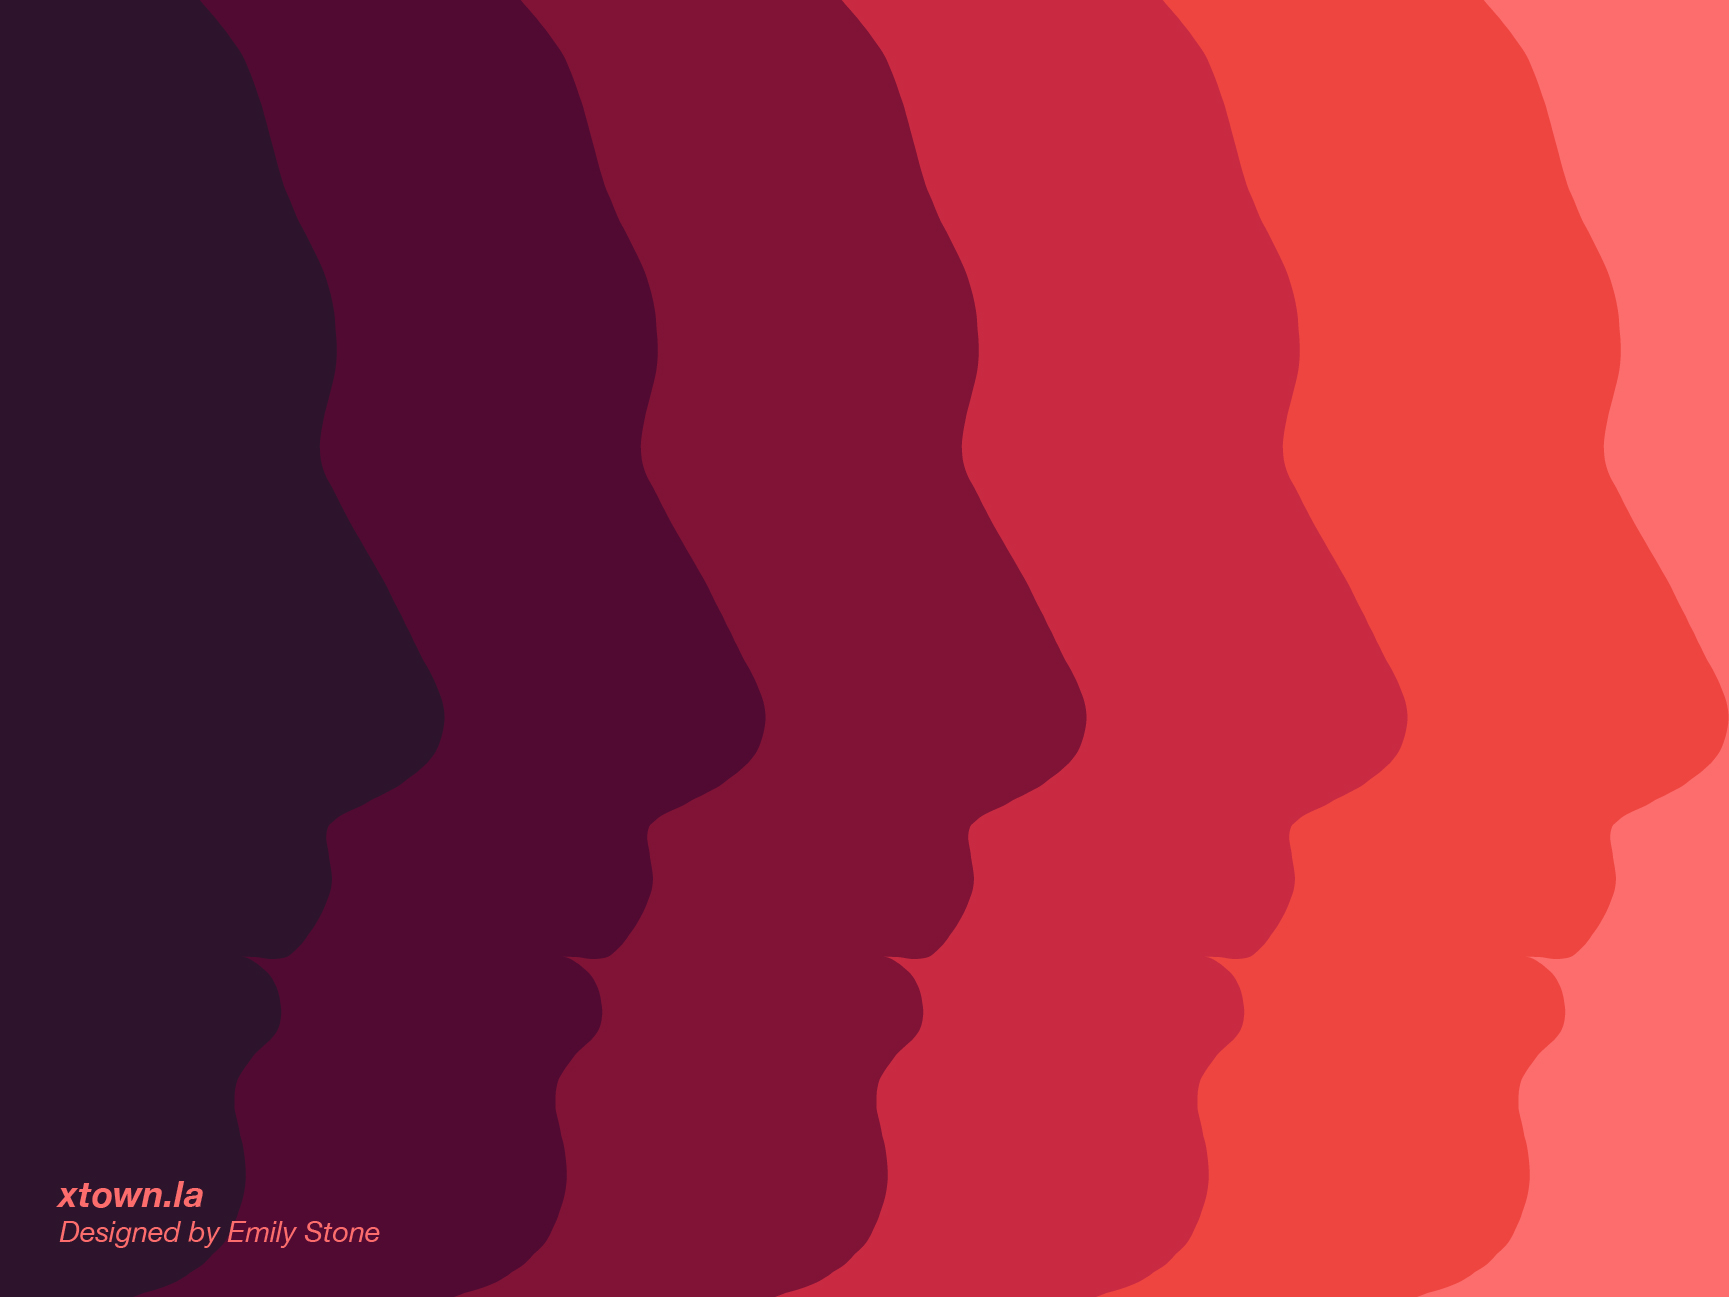 Faces in profile fading from orange on the right to dark red on the left to illustrate a story about intolerance